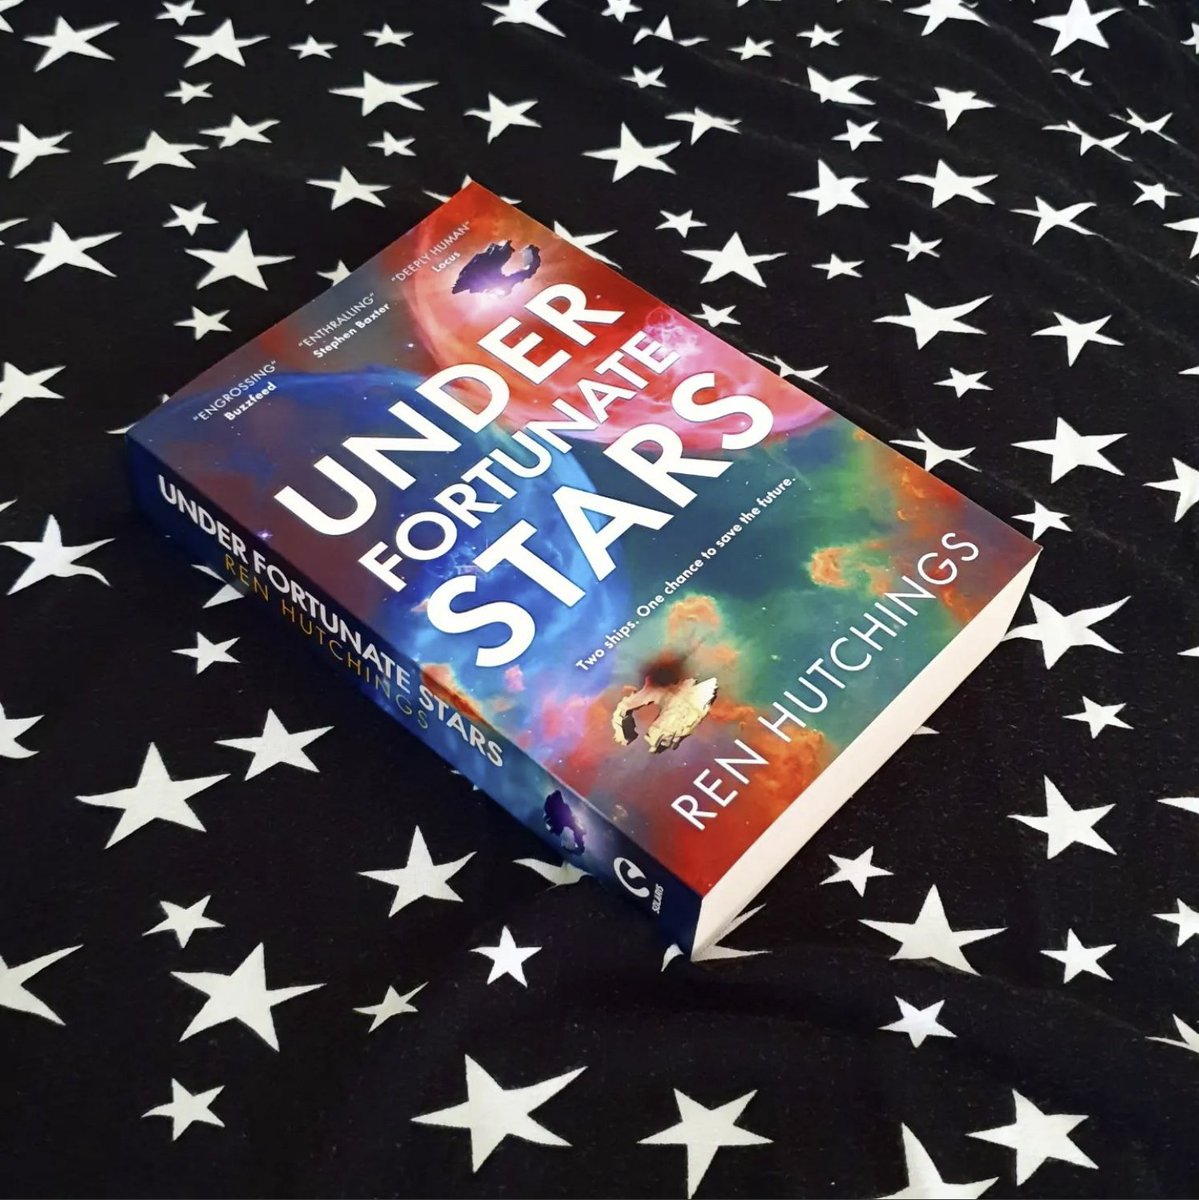 Never meet your heroes... unless you're stuck in a time rift with them 🌠 For fans of Becky Chambers and Firefly, @voidcricket's hopeful space opera, UNDER FORTUNATE STARS, is out now in paperback! ➡️ bit.ly/3MSihOR